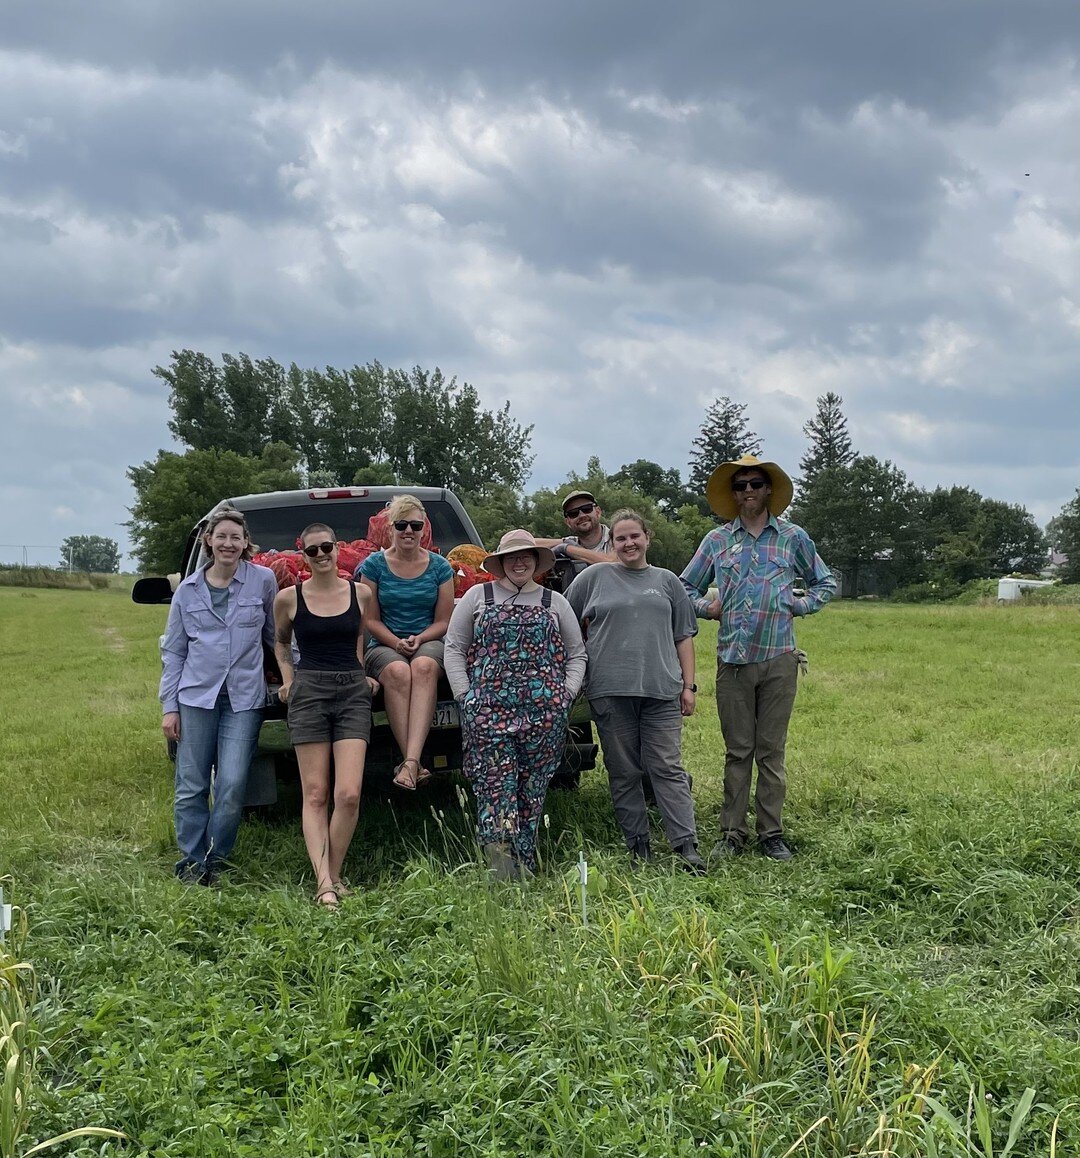 Teamwork was the name of the game at Heritage Farm as members of the SSE preservation, field ops, and marketing teams gathered to harvest garlic from our collection last week. Once harvested from the field, the garlic plants are placed in a cool, dry